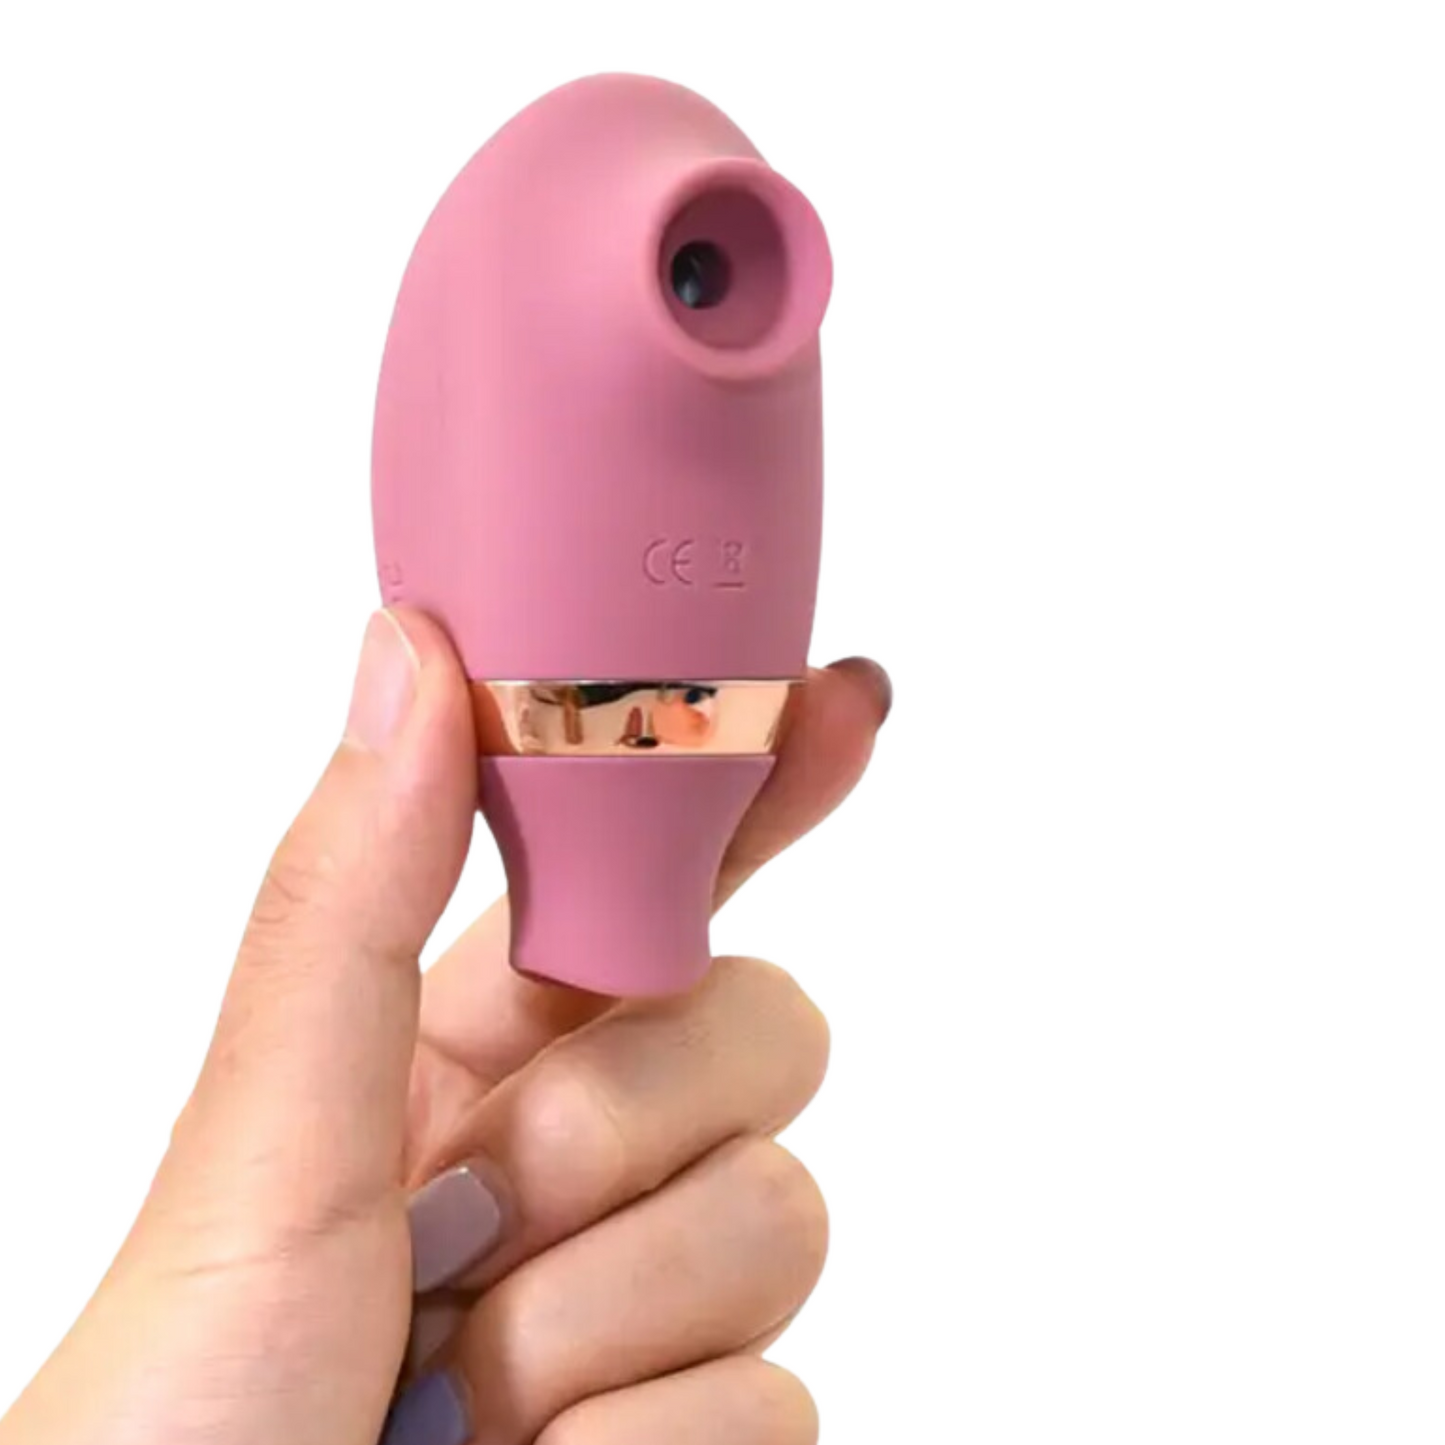 Duo Temptress | 2 in 1 Suction & Tongue Massager Masturbator Vibrator Sex Toys For Women for $29 – Most Premium Toys from Ecsta Care